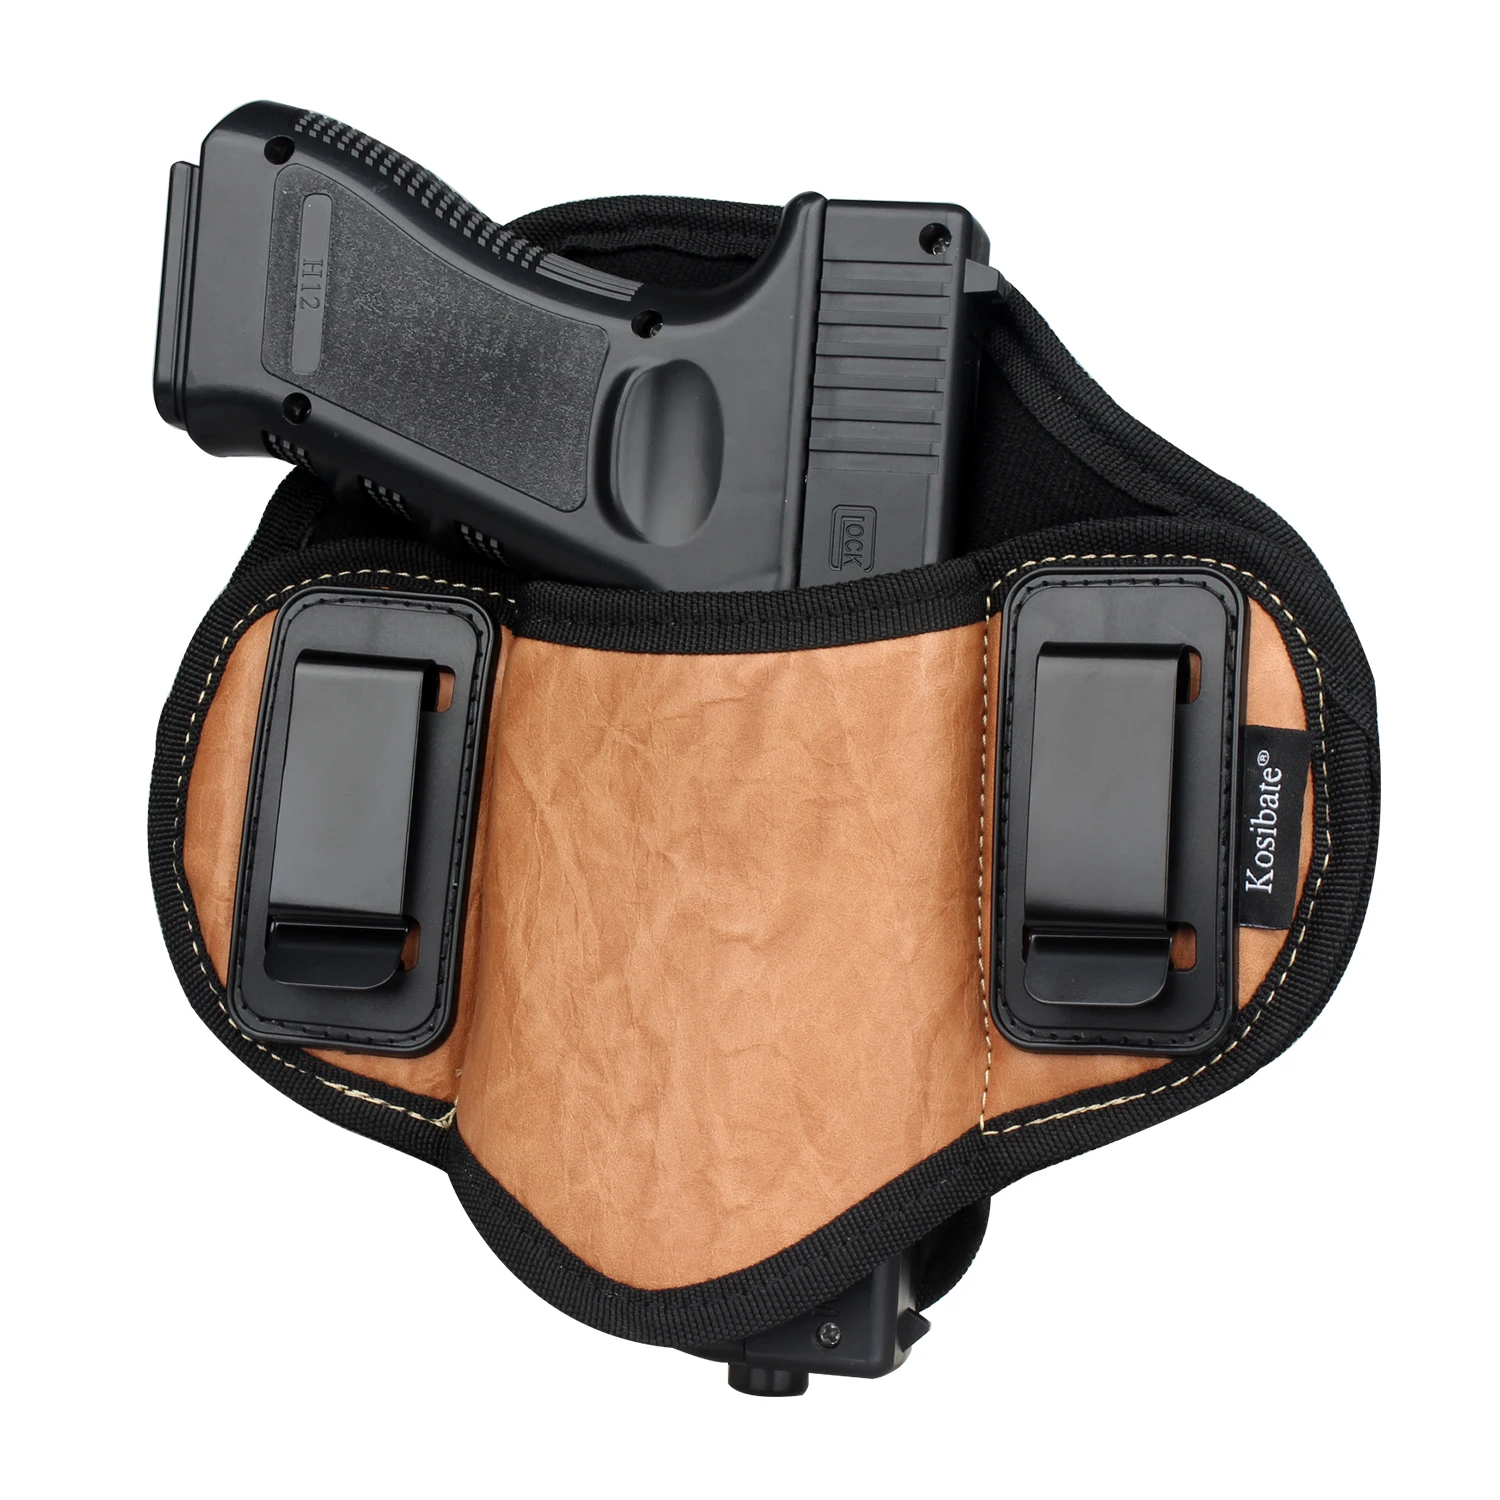 Details about   Tactical Pancake Concealed Carry IWB Gun Holster Hunting Holster PU Leather 